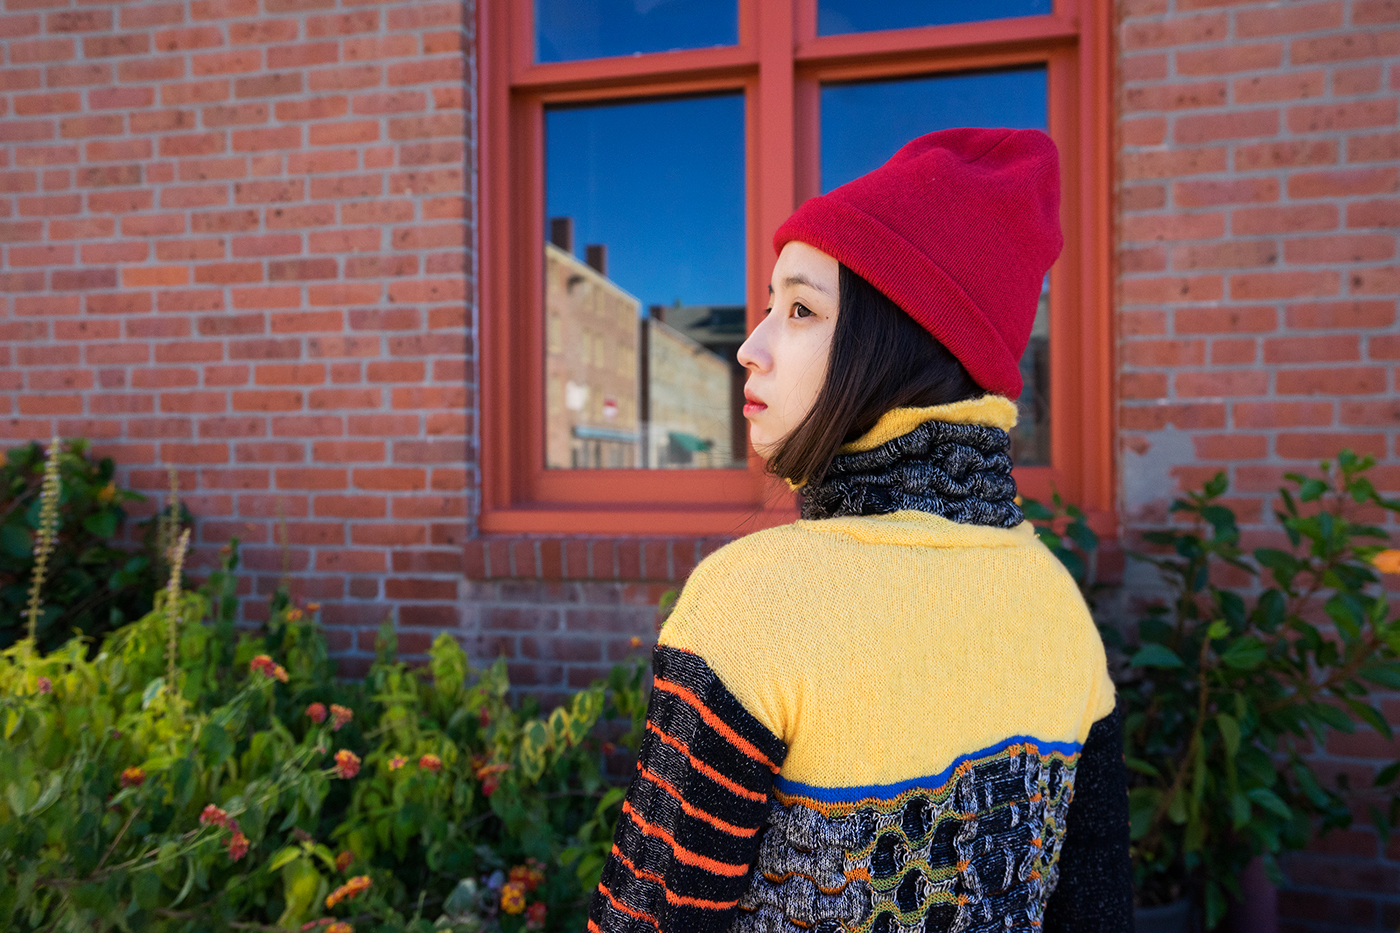 Stoll knit sweater pollution bright architecture door knitwear